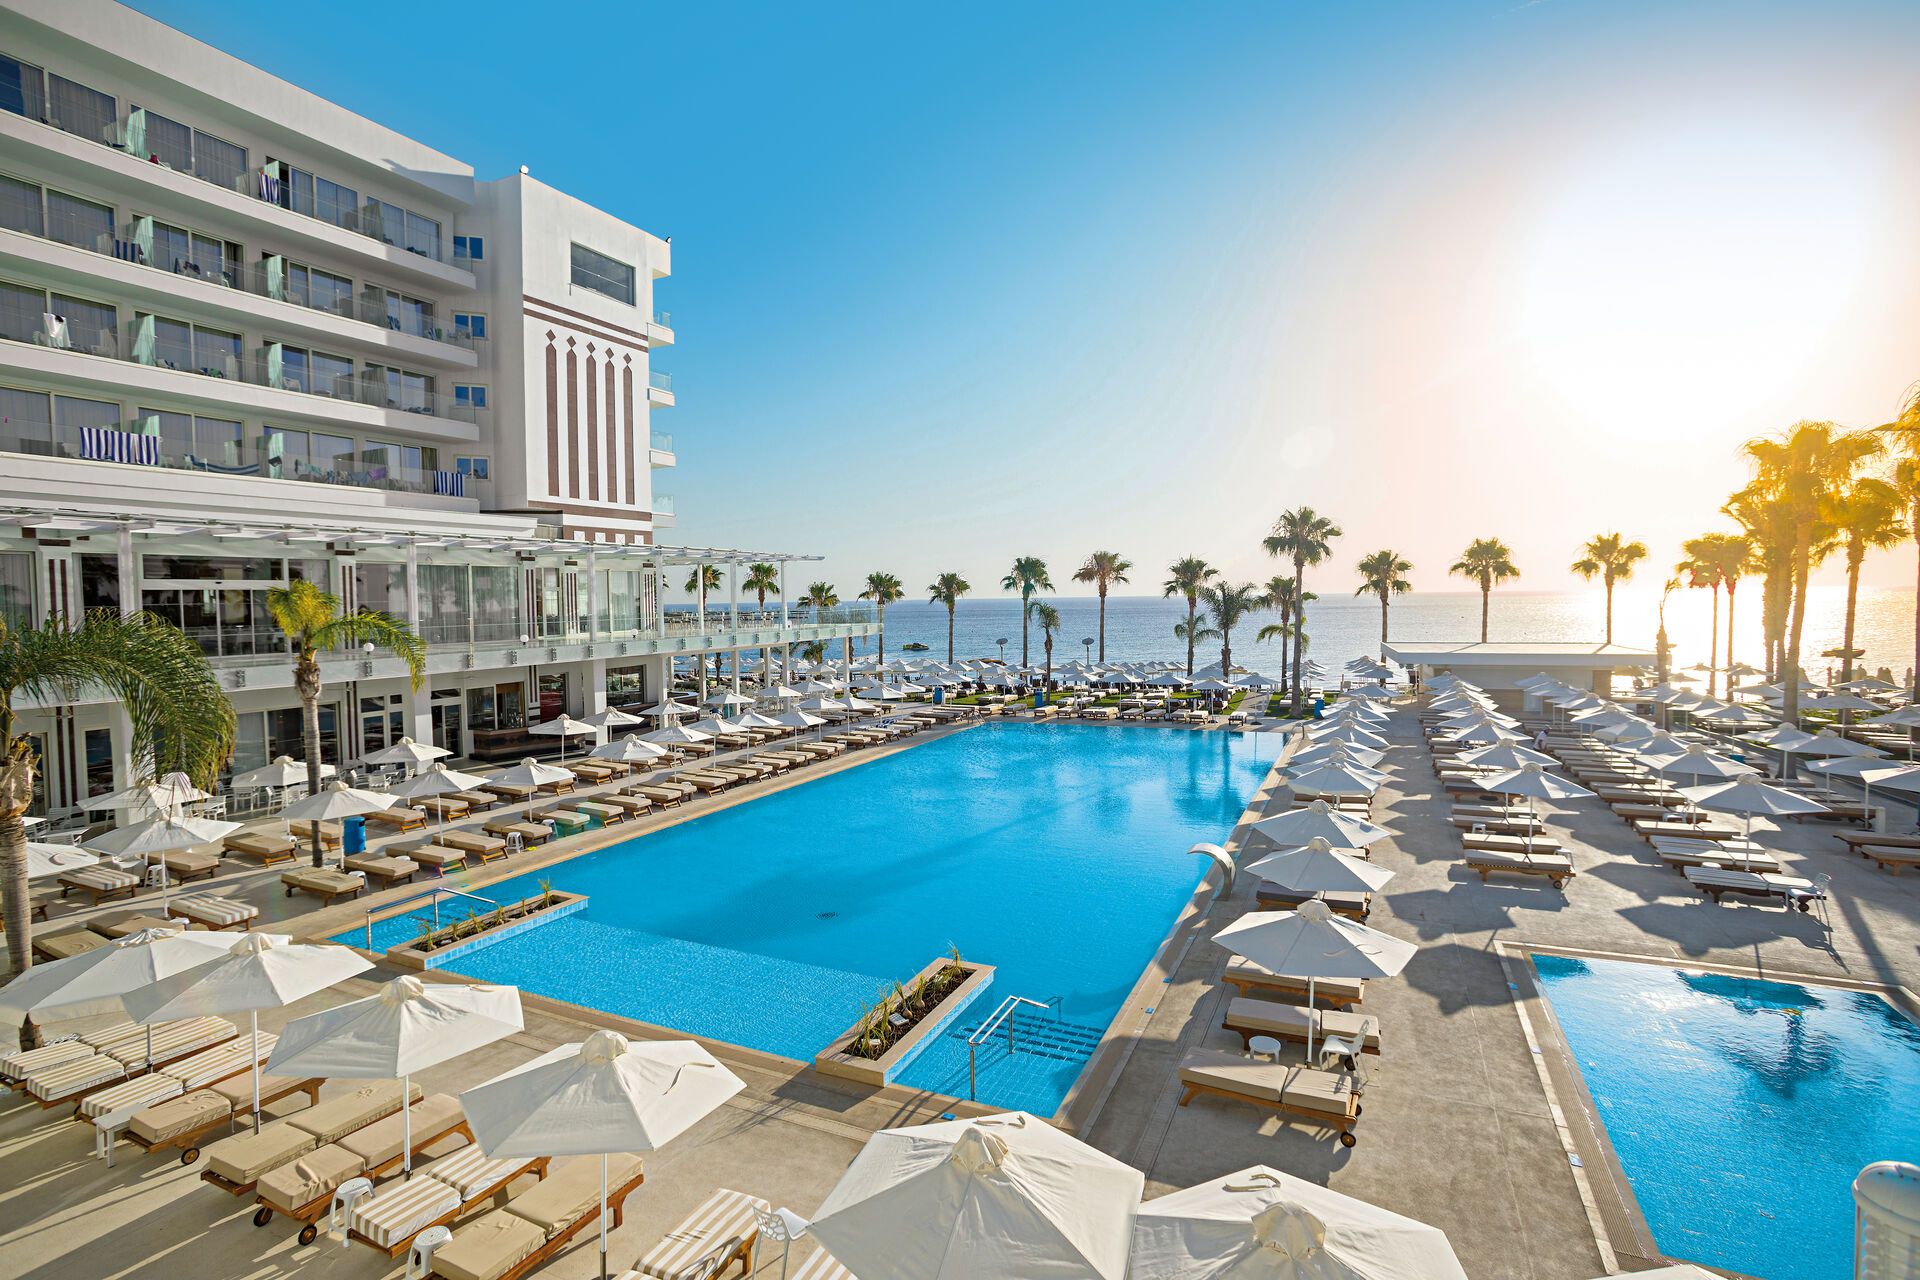 Constantinos The Great Beach Hotel - 4*